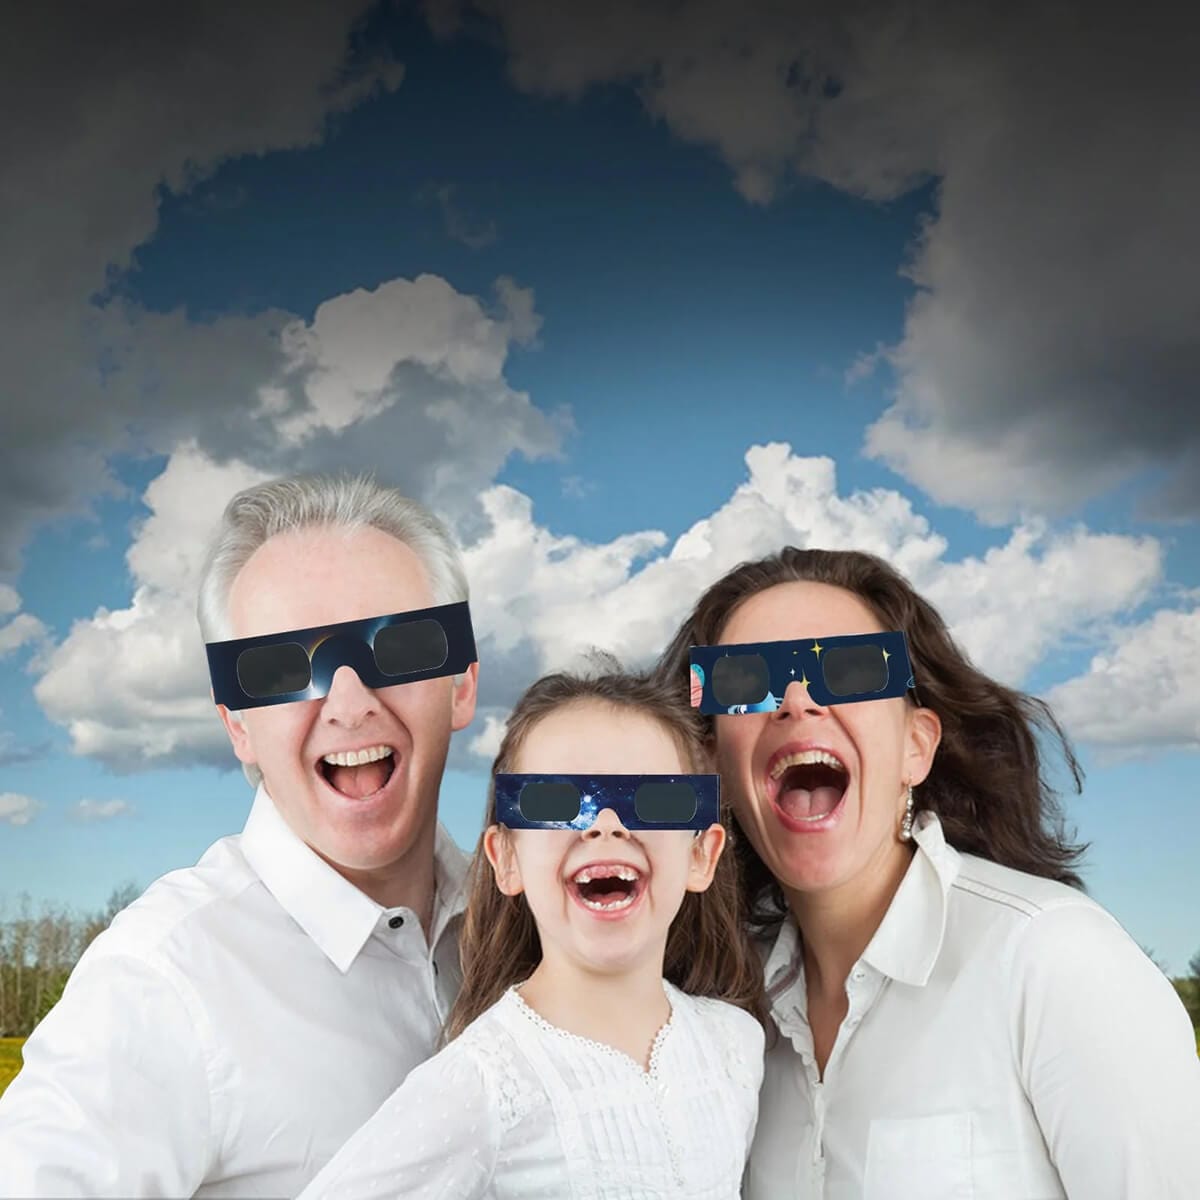 PNJ Eclipse Glasses ISO Certified Solar Eclipse Glasses - Galaxy